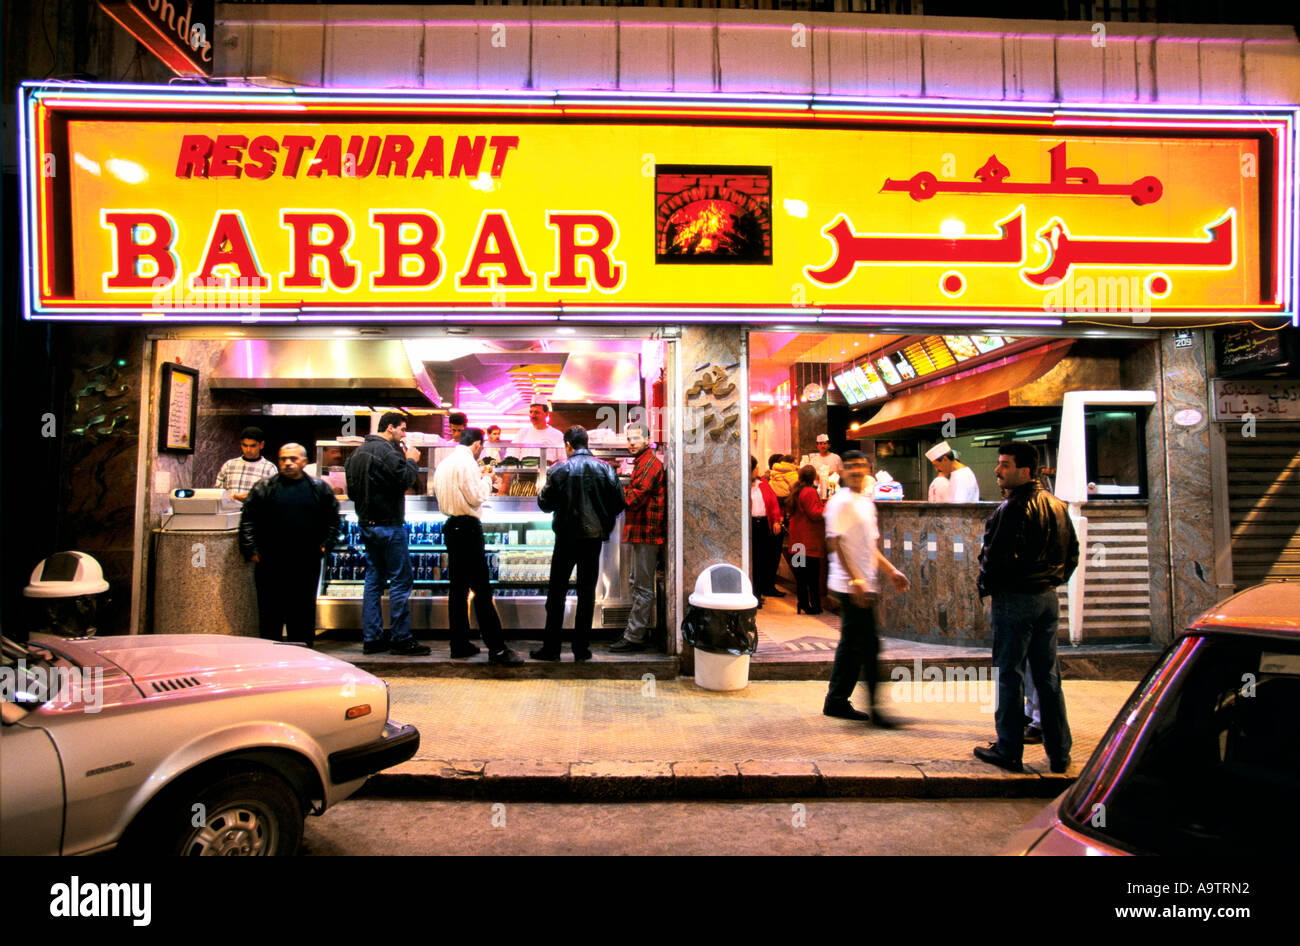 BEIRUT WEST BEIRUT HAMRA DISTRICT BARBAR RESTAURANT SELLING HOT SANDWICHES IN EVENING 1998 Stock Photo